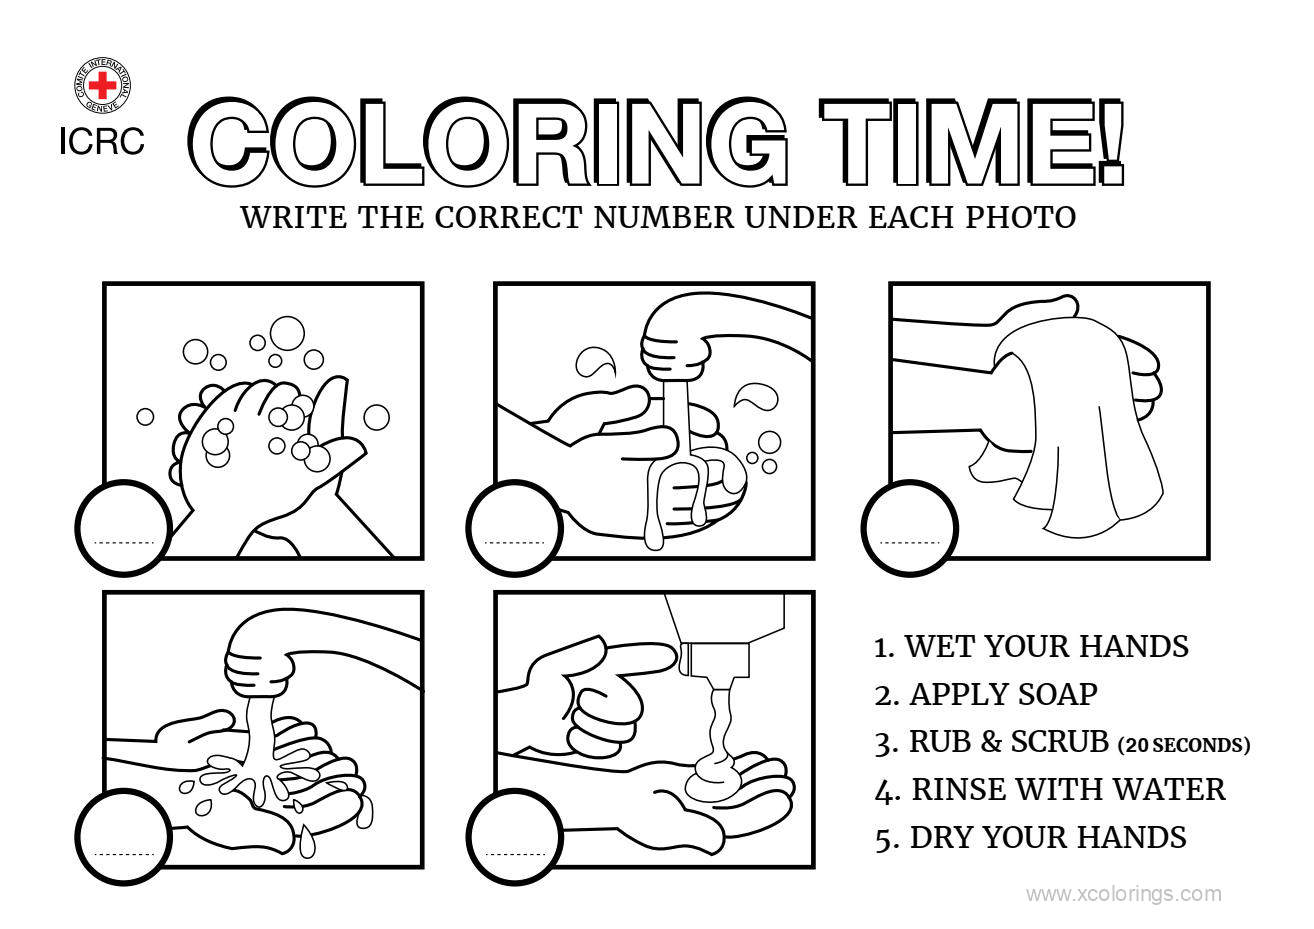 Free Wash Hands Tips for Coronavirus Coloring Pages printable